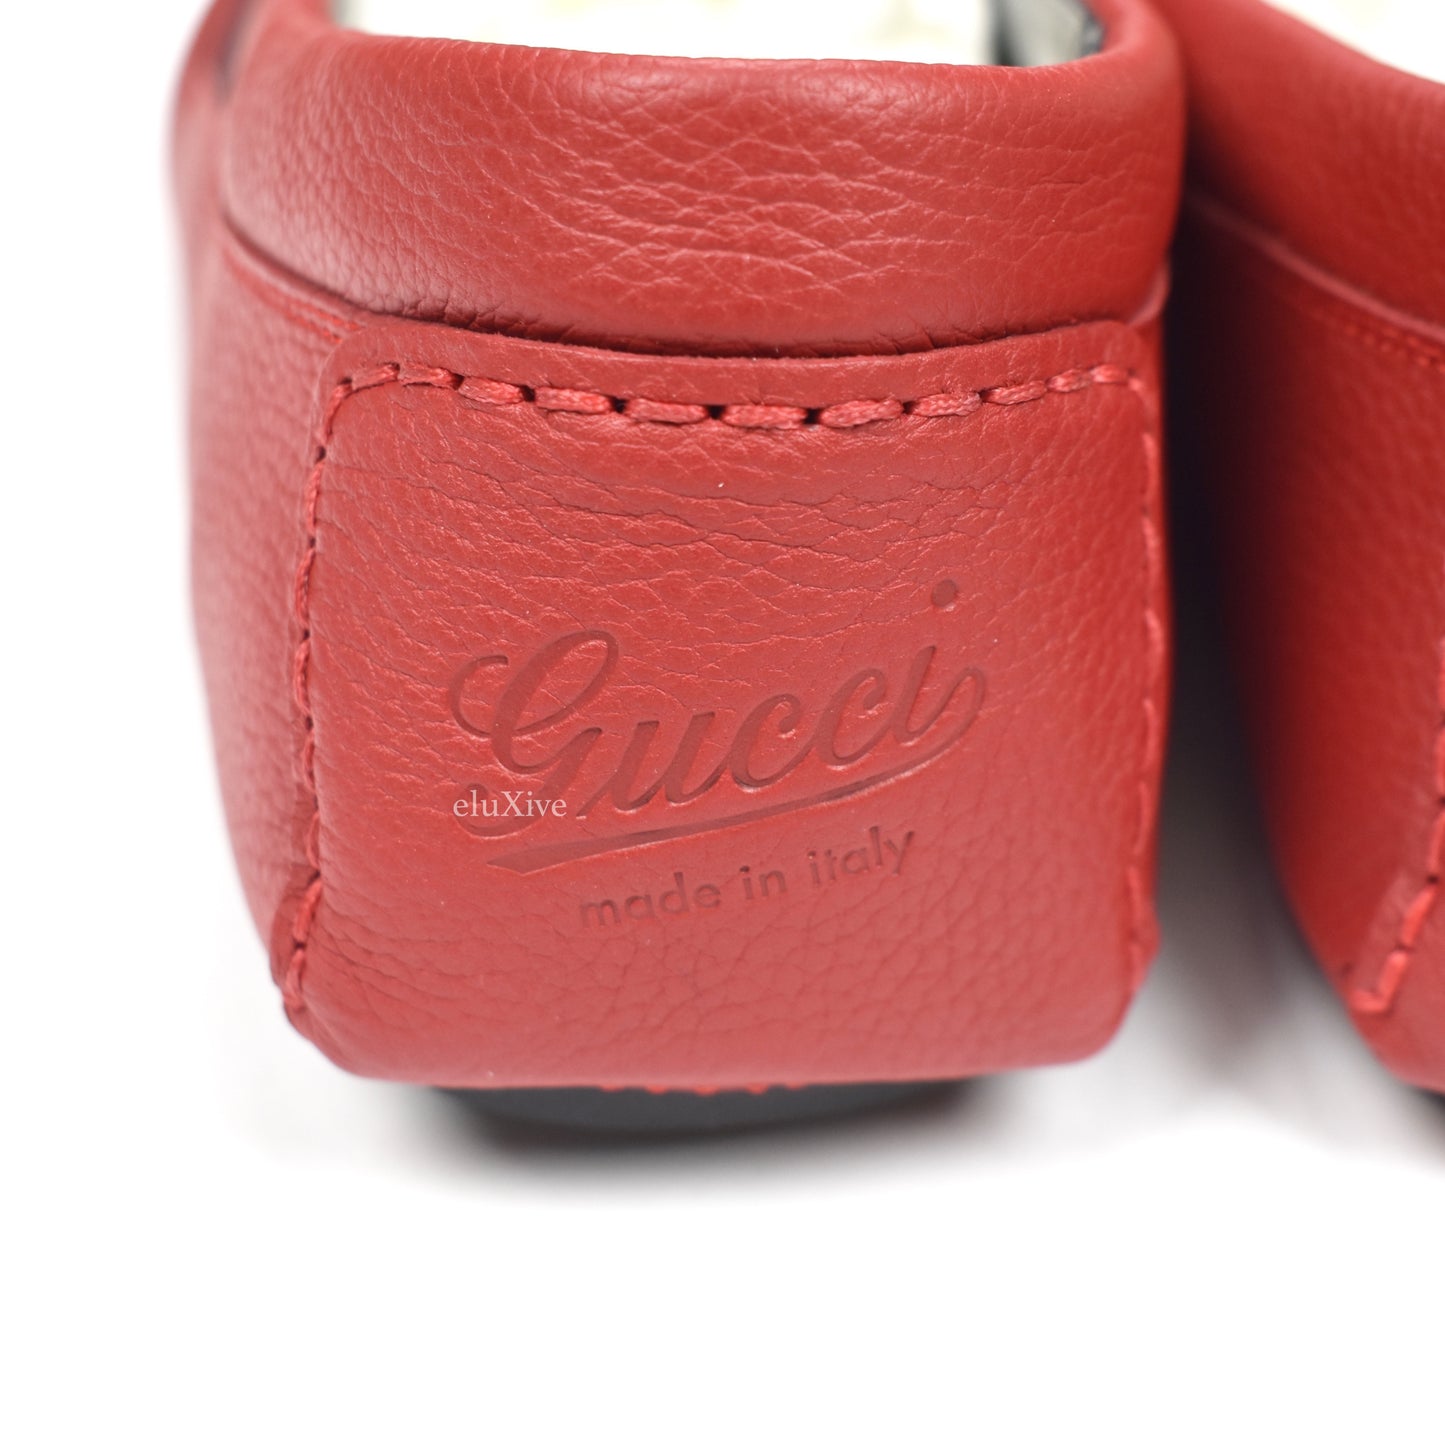 Gucci - Red Leather Web Logo Driving Loafers